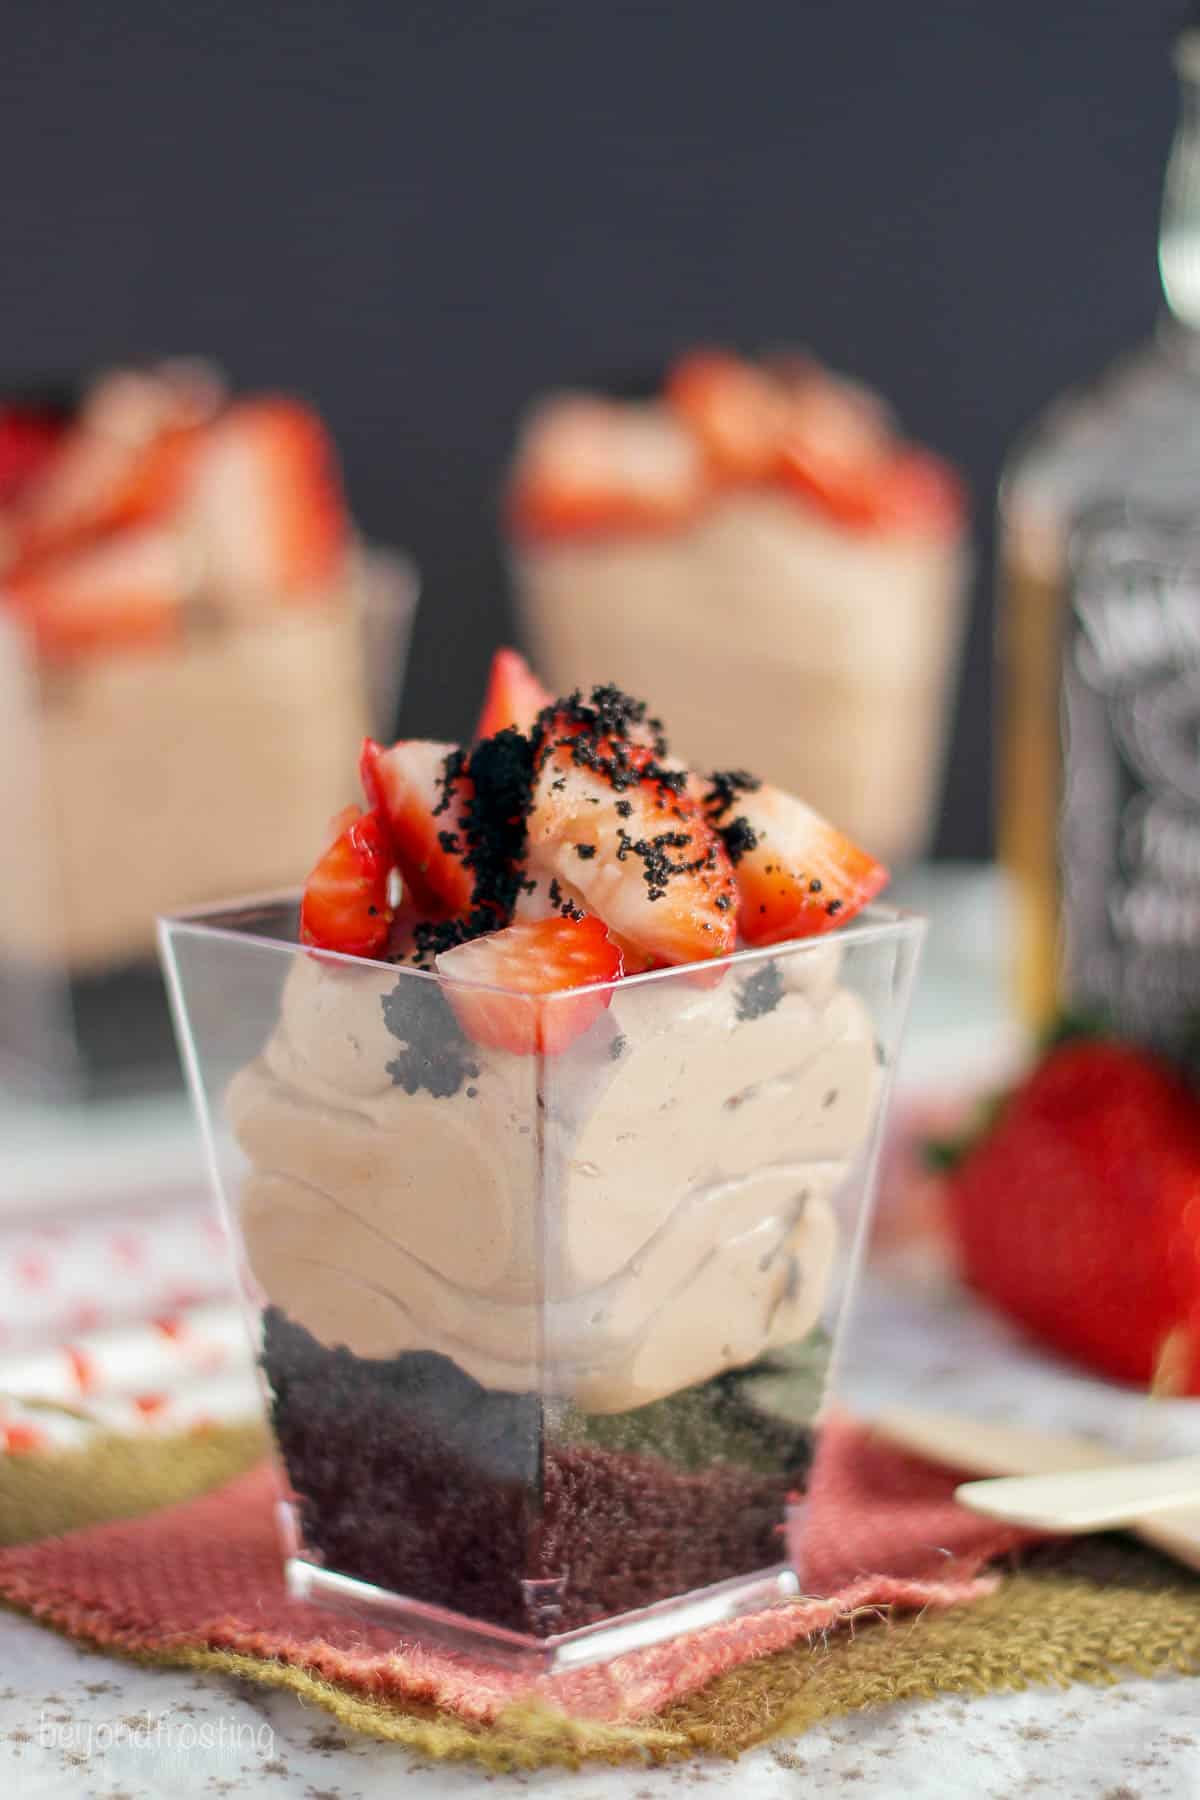 side view of a no-bake spiked parfait with two more parfaits and a bottle of whiskey in the background